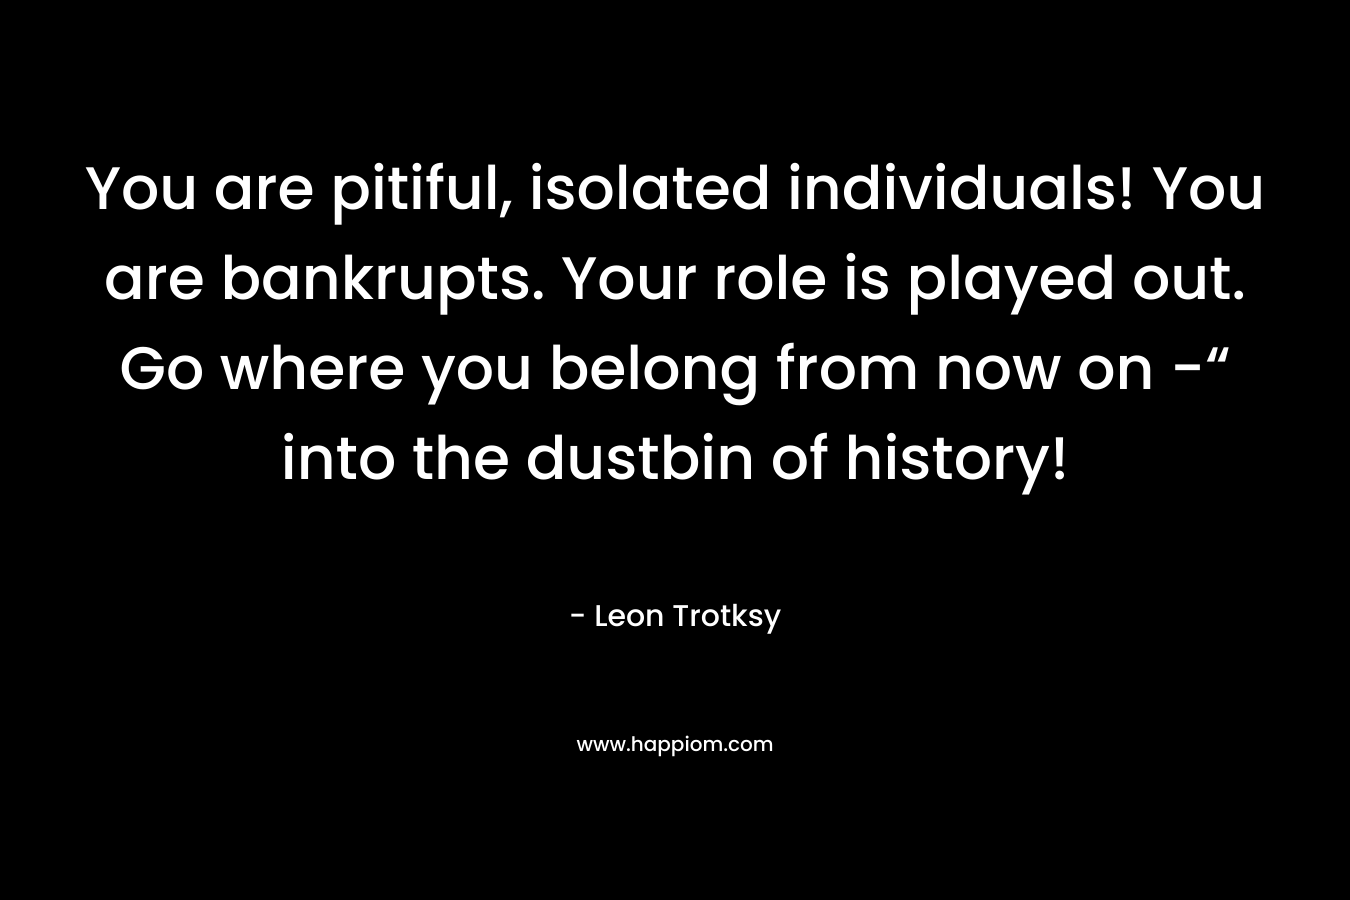 You are pitiful, isolated individuals! You are bankrupts. Your role is played out. Go where you belong from now on -“ into the dustbin of history! – Leon Trotksy